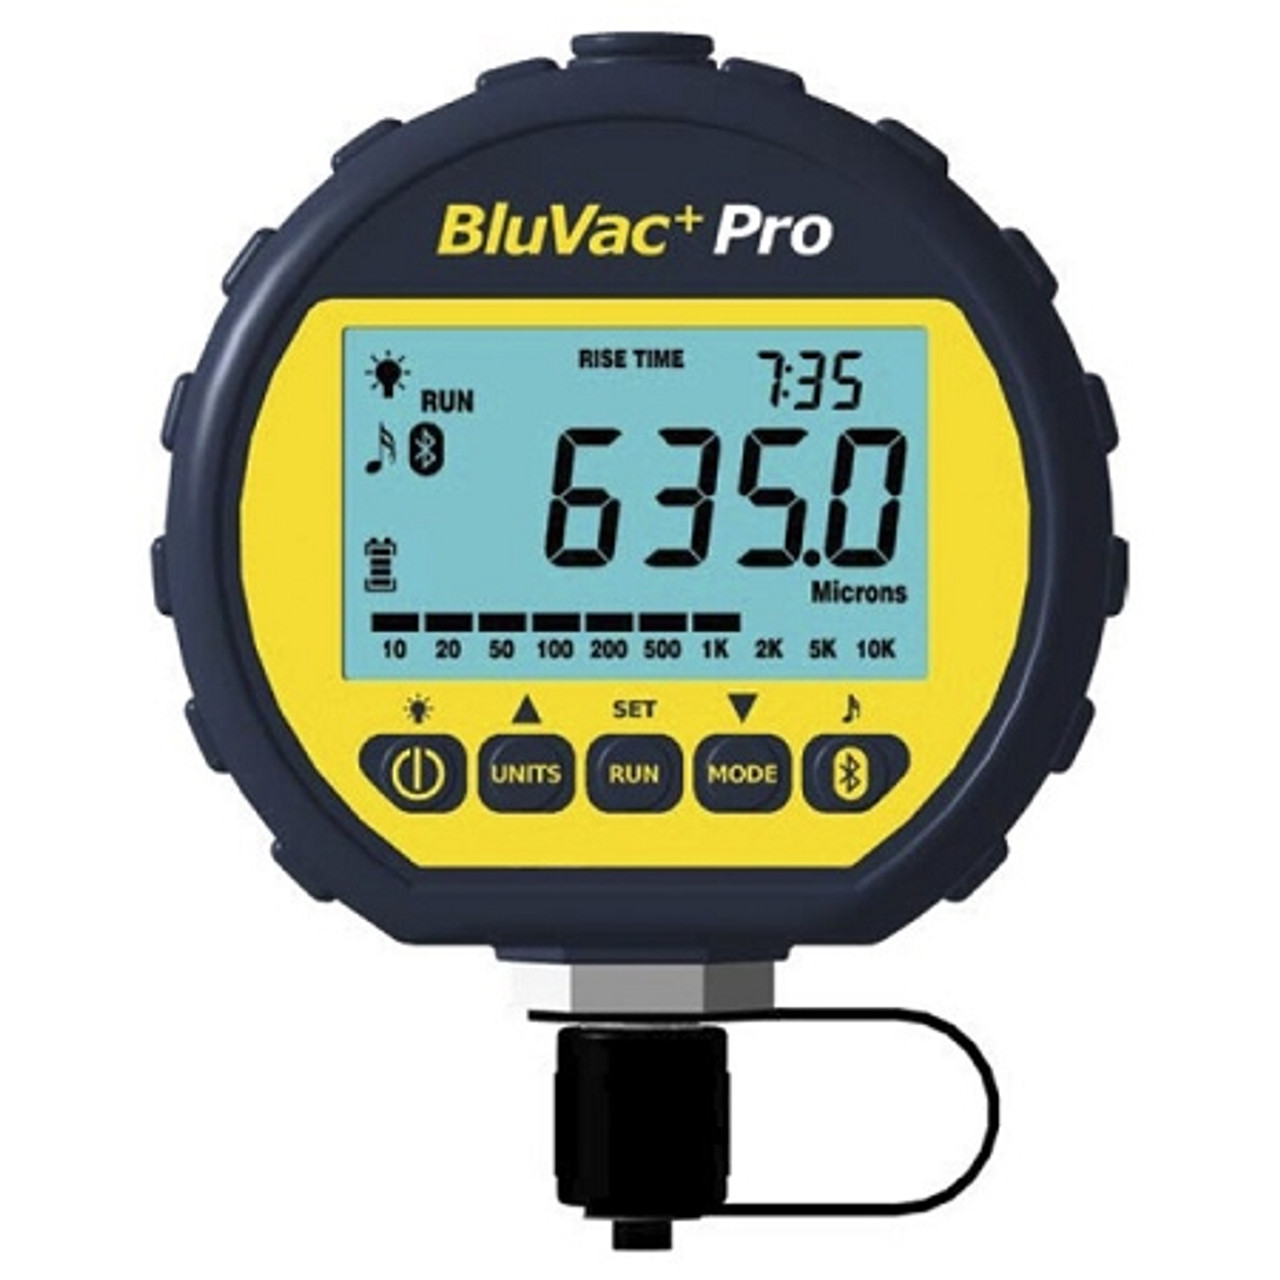 Accutools BluVac+ Professional Digital Micron Gauge with Coupler